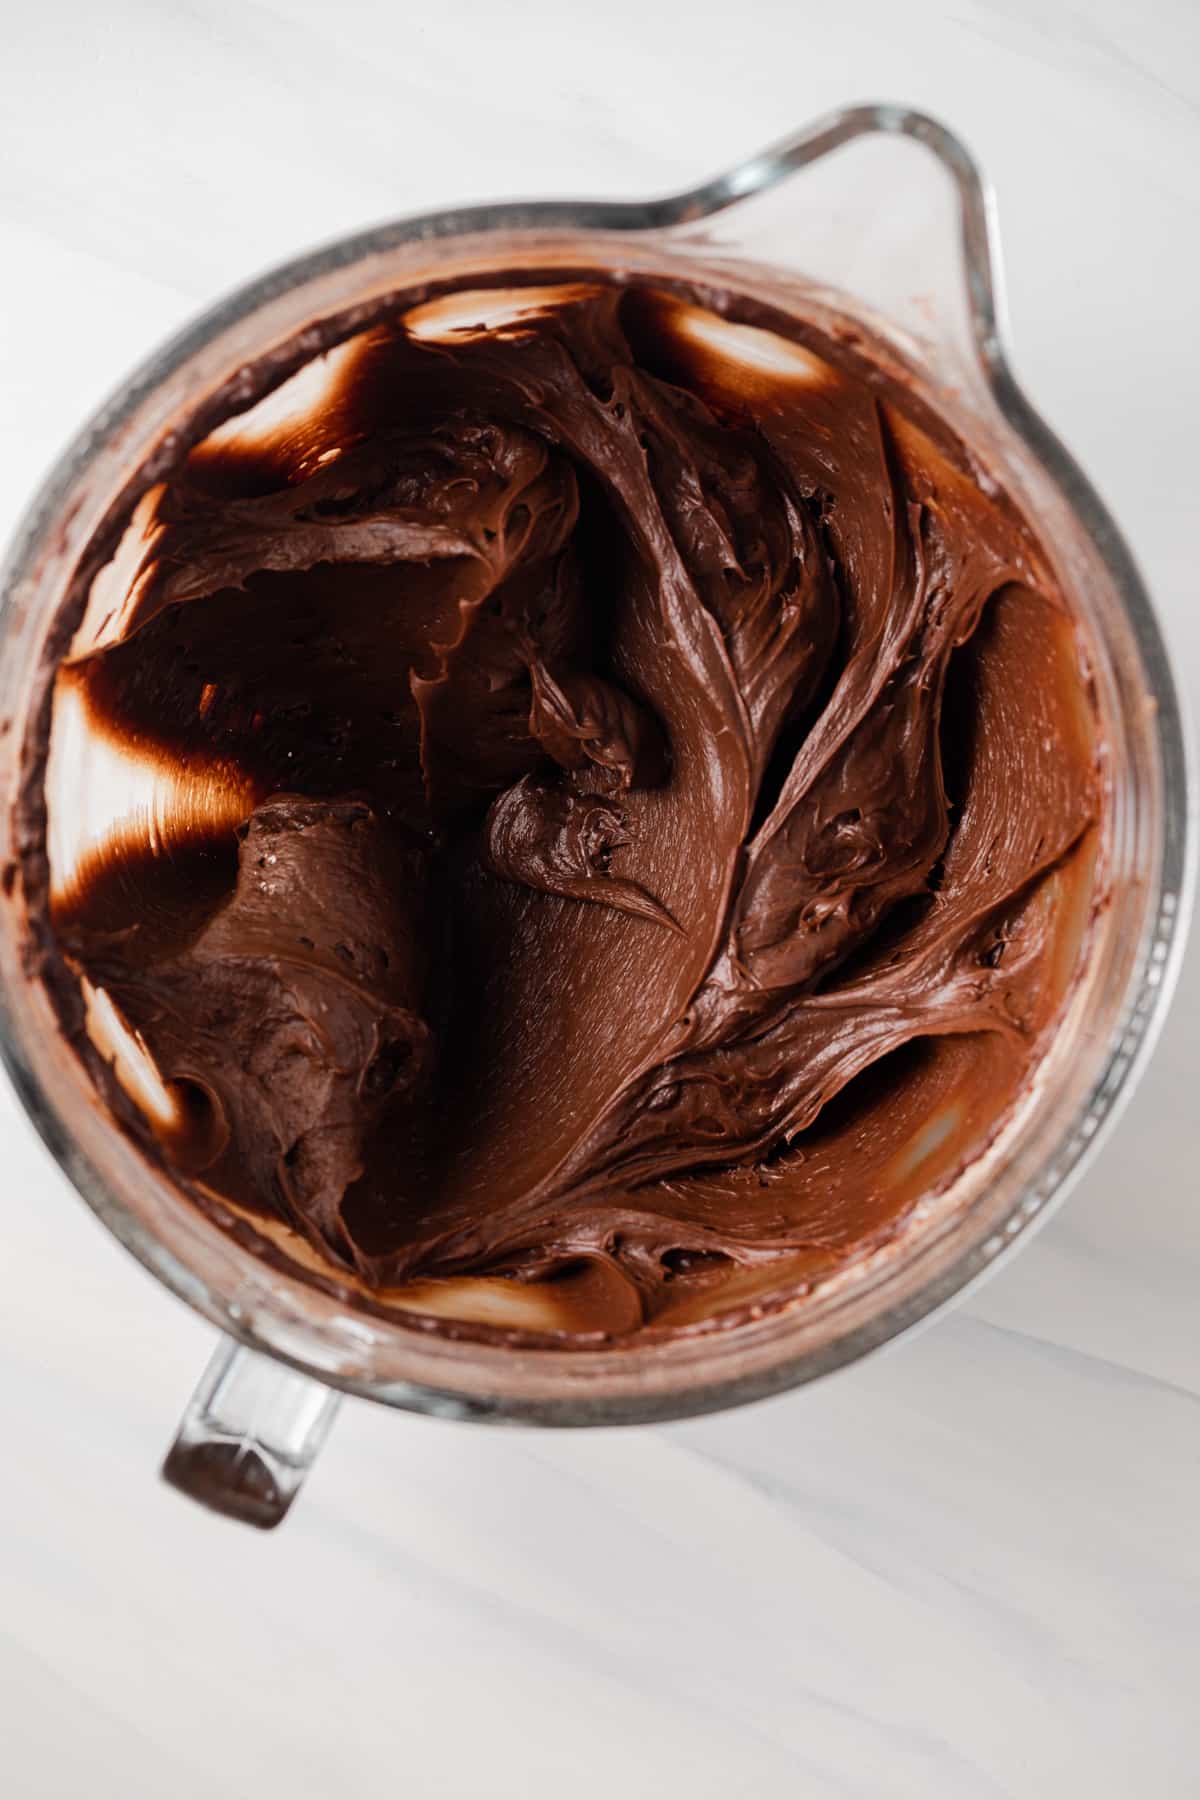 Chocolate fudge frosting in glass bowl.